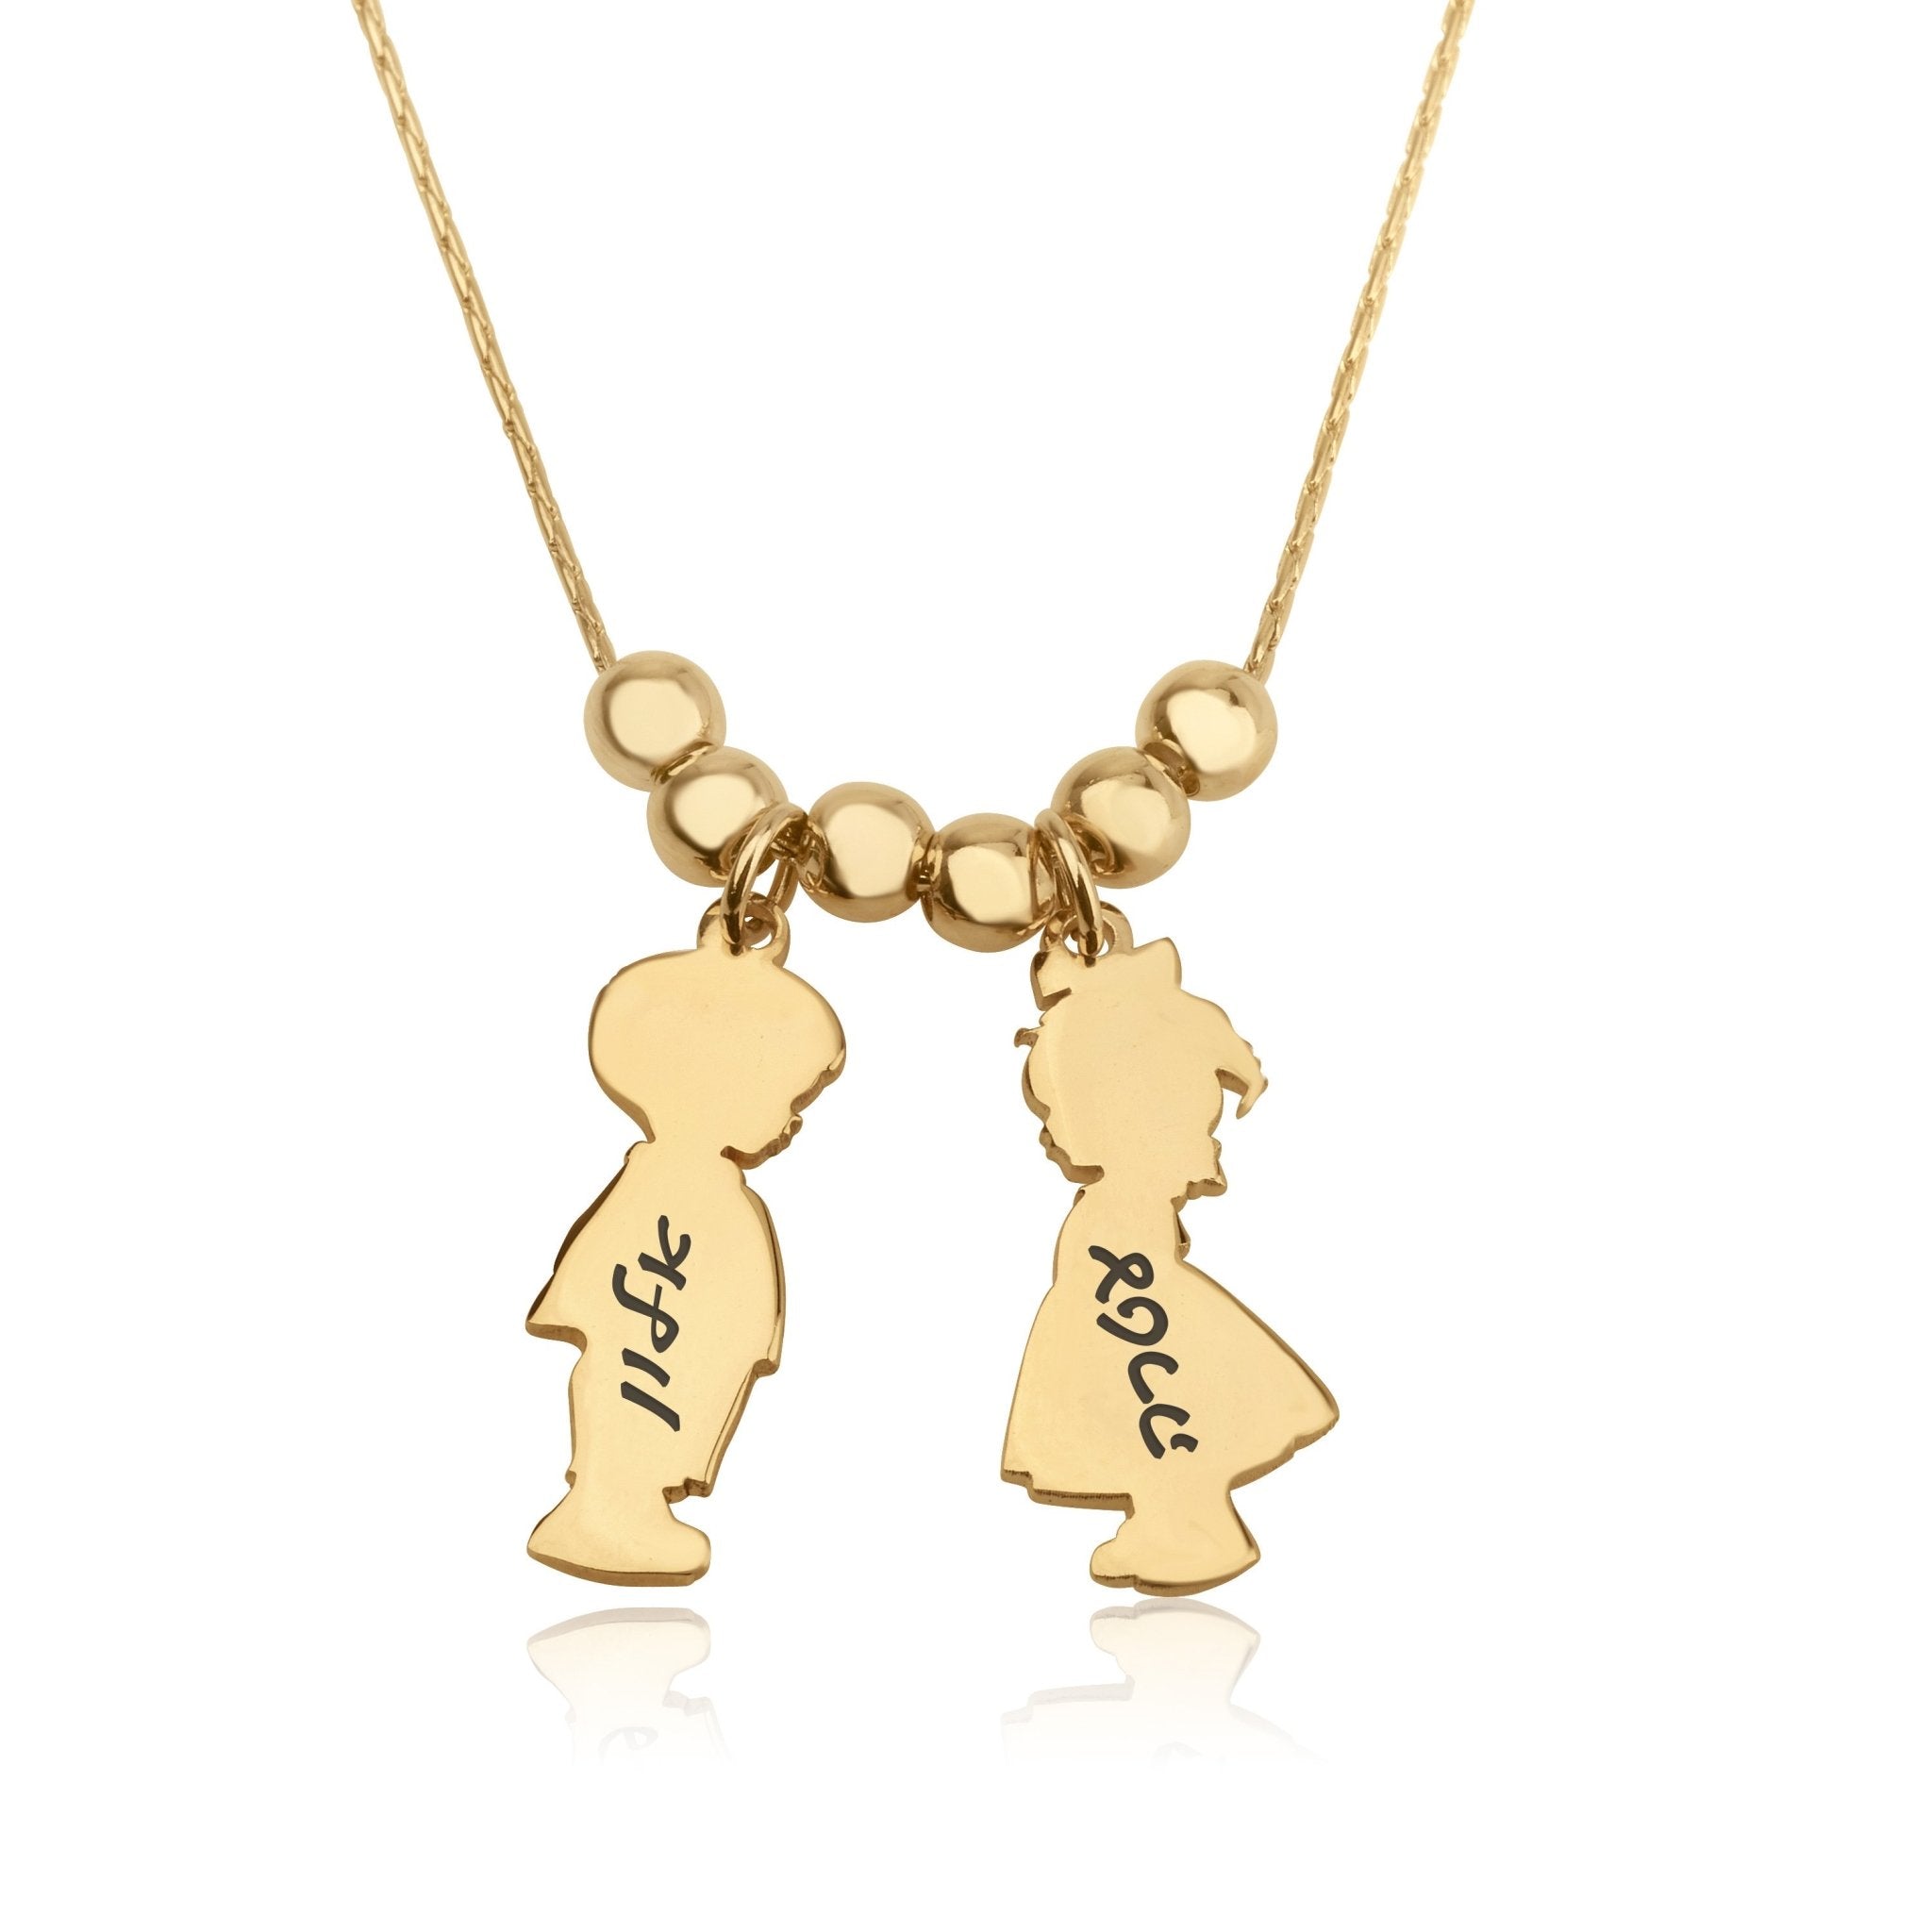 Gold Plated Kids Charms Family Necklace with Chain. Boys and Girls